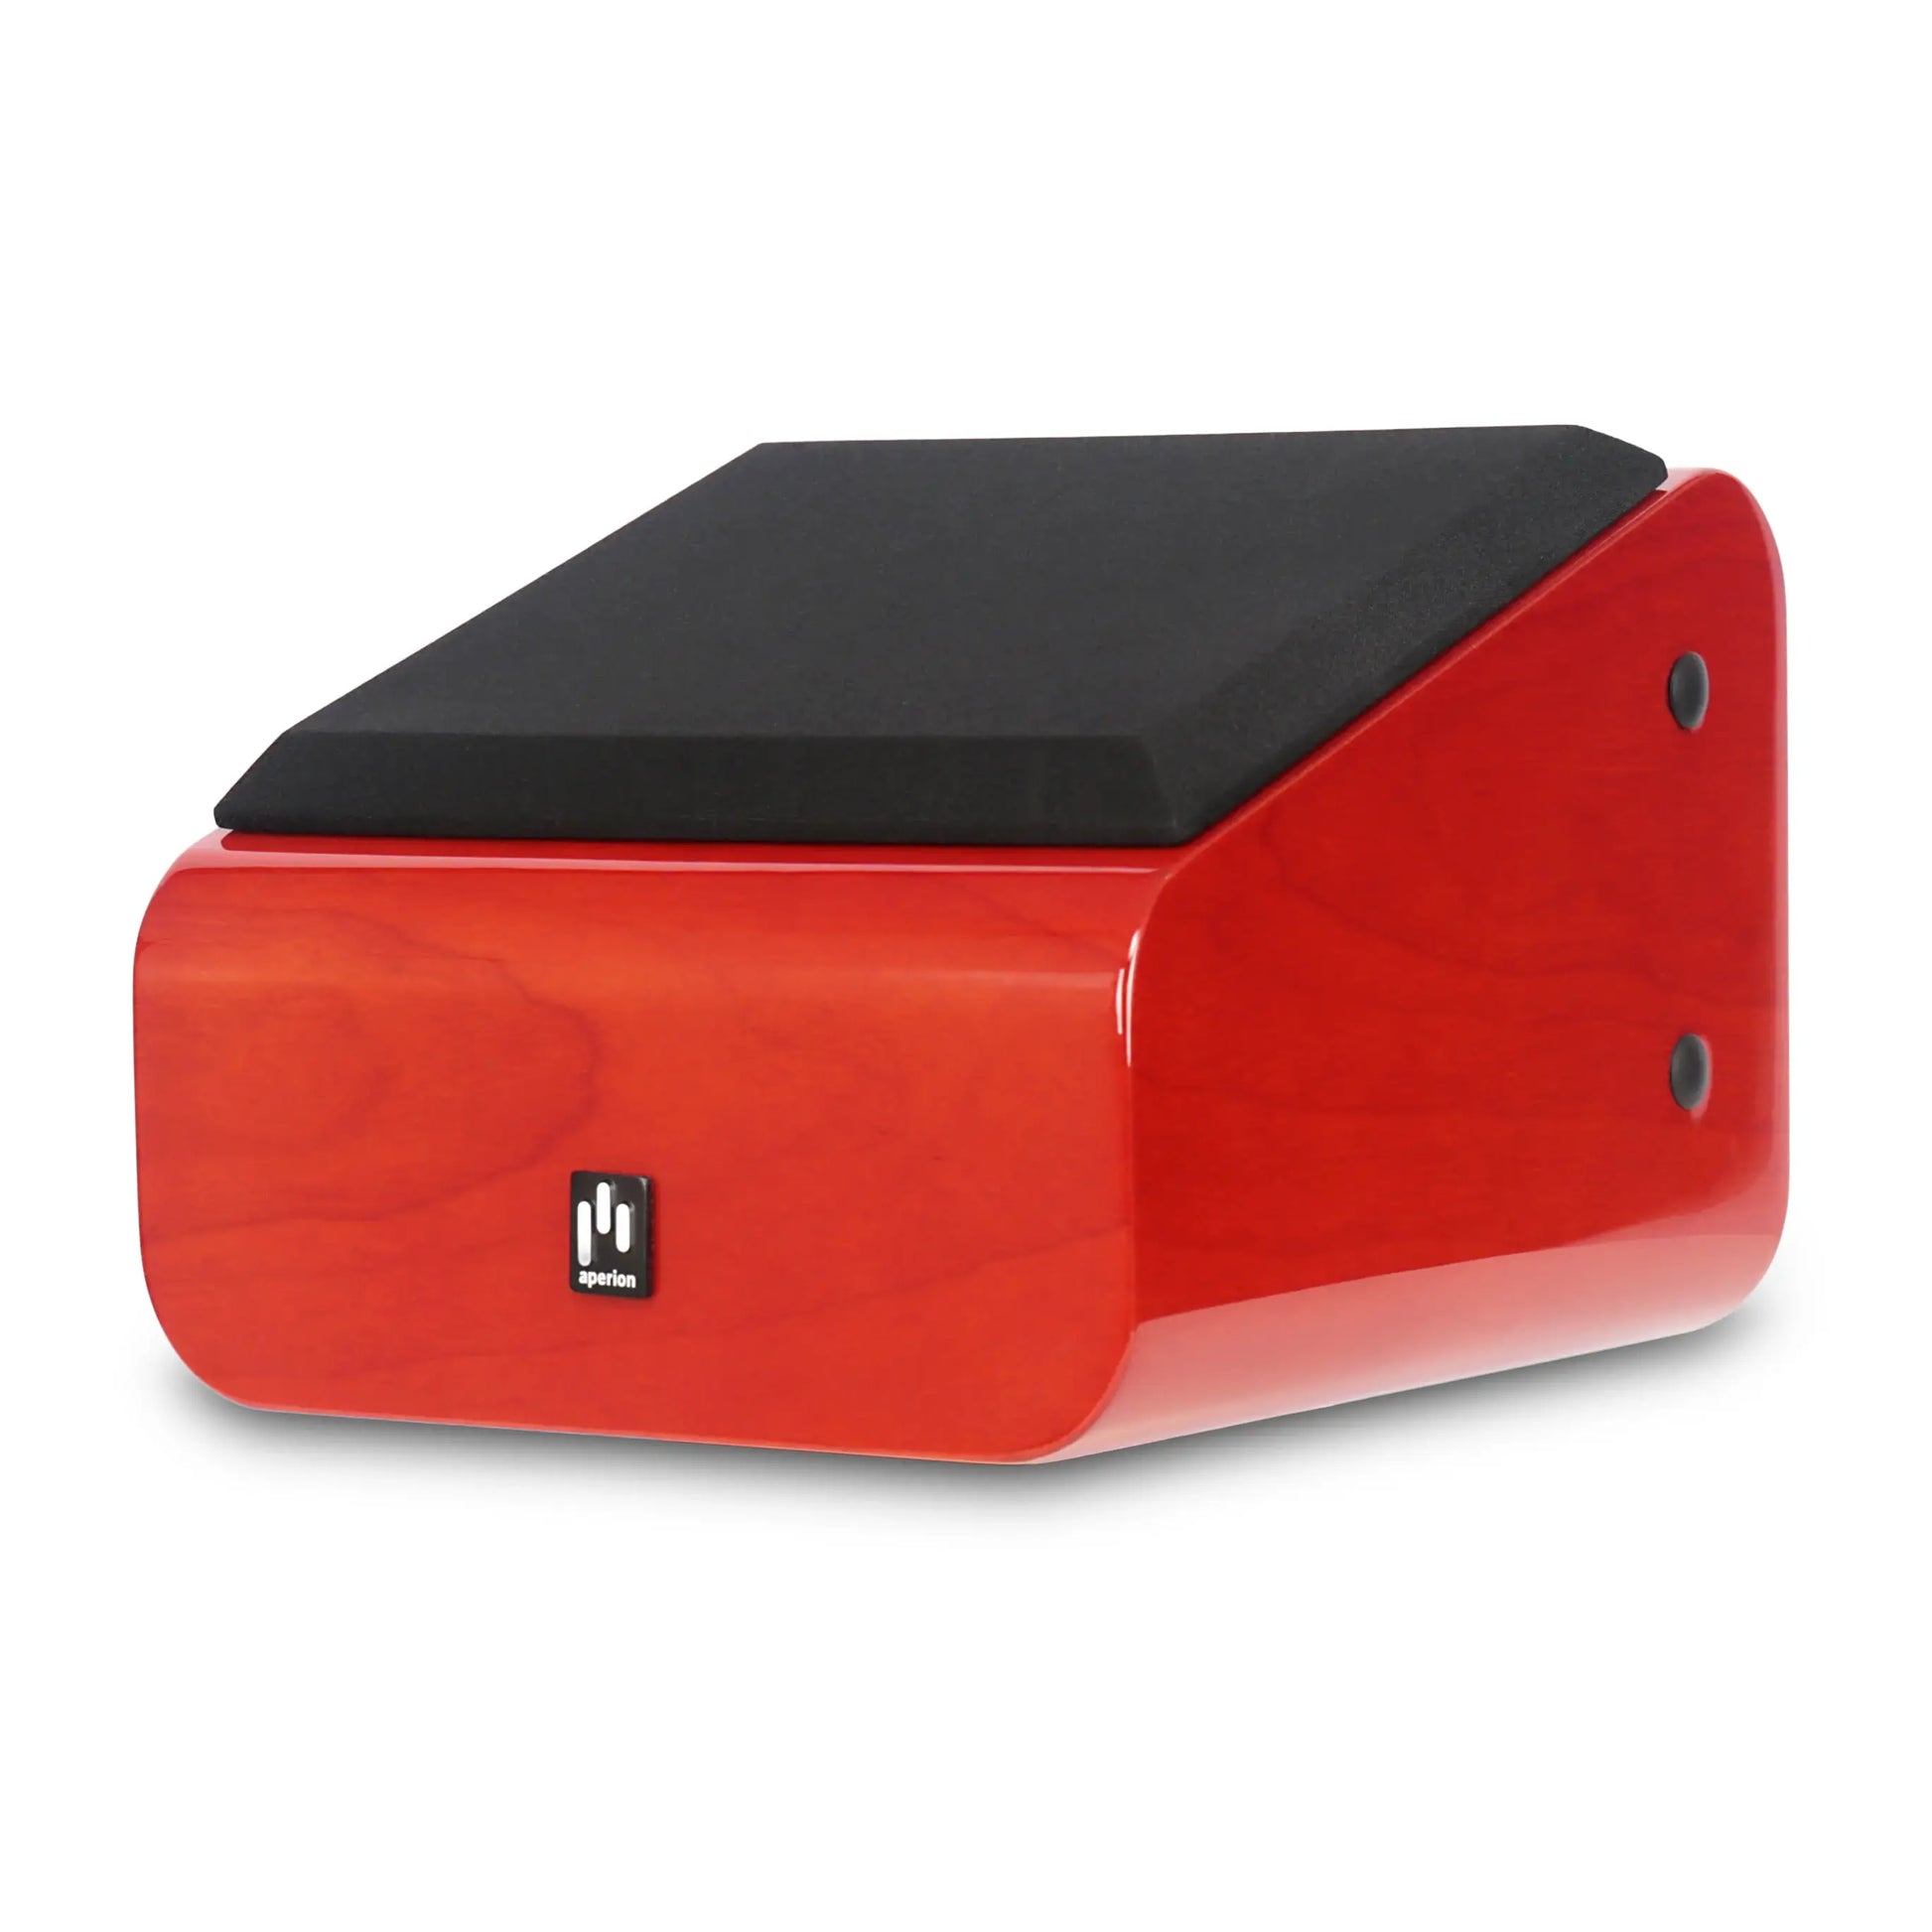 Aperion-A5-Atmos-5.25"-Immersive-Reflective/Height-Module-Speaker-Gloss-Cherry-Single-Side-With-Grille-aperionaudio